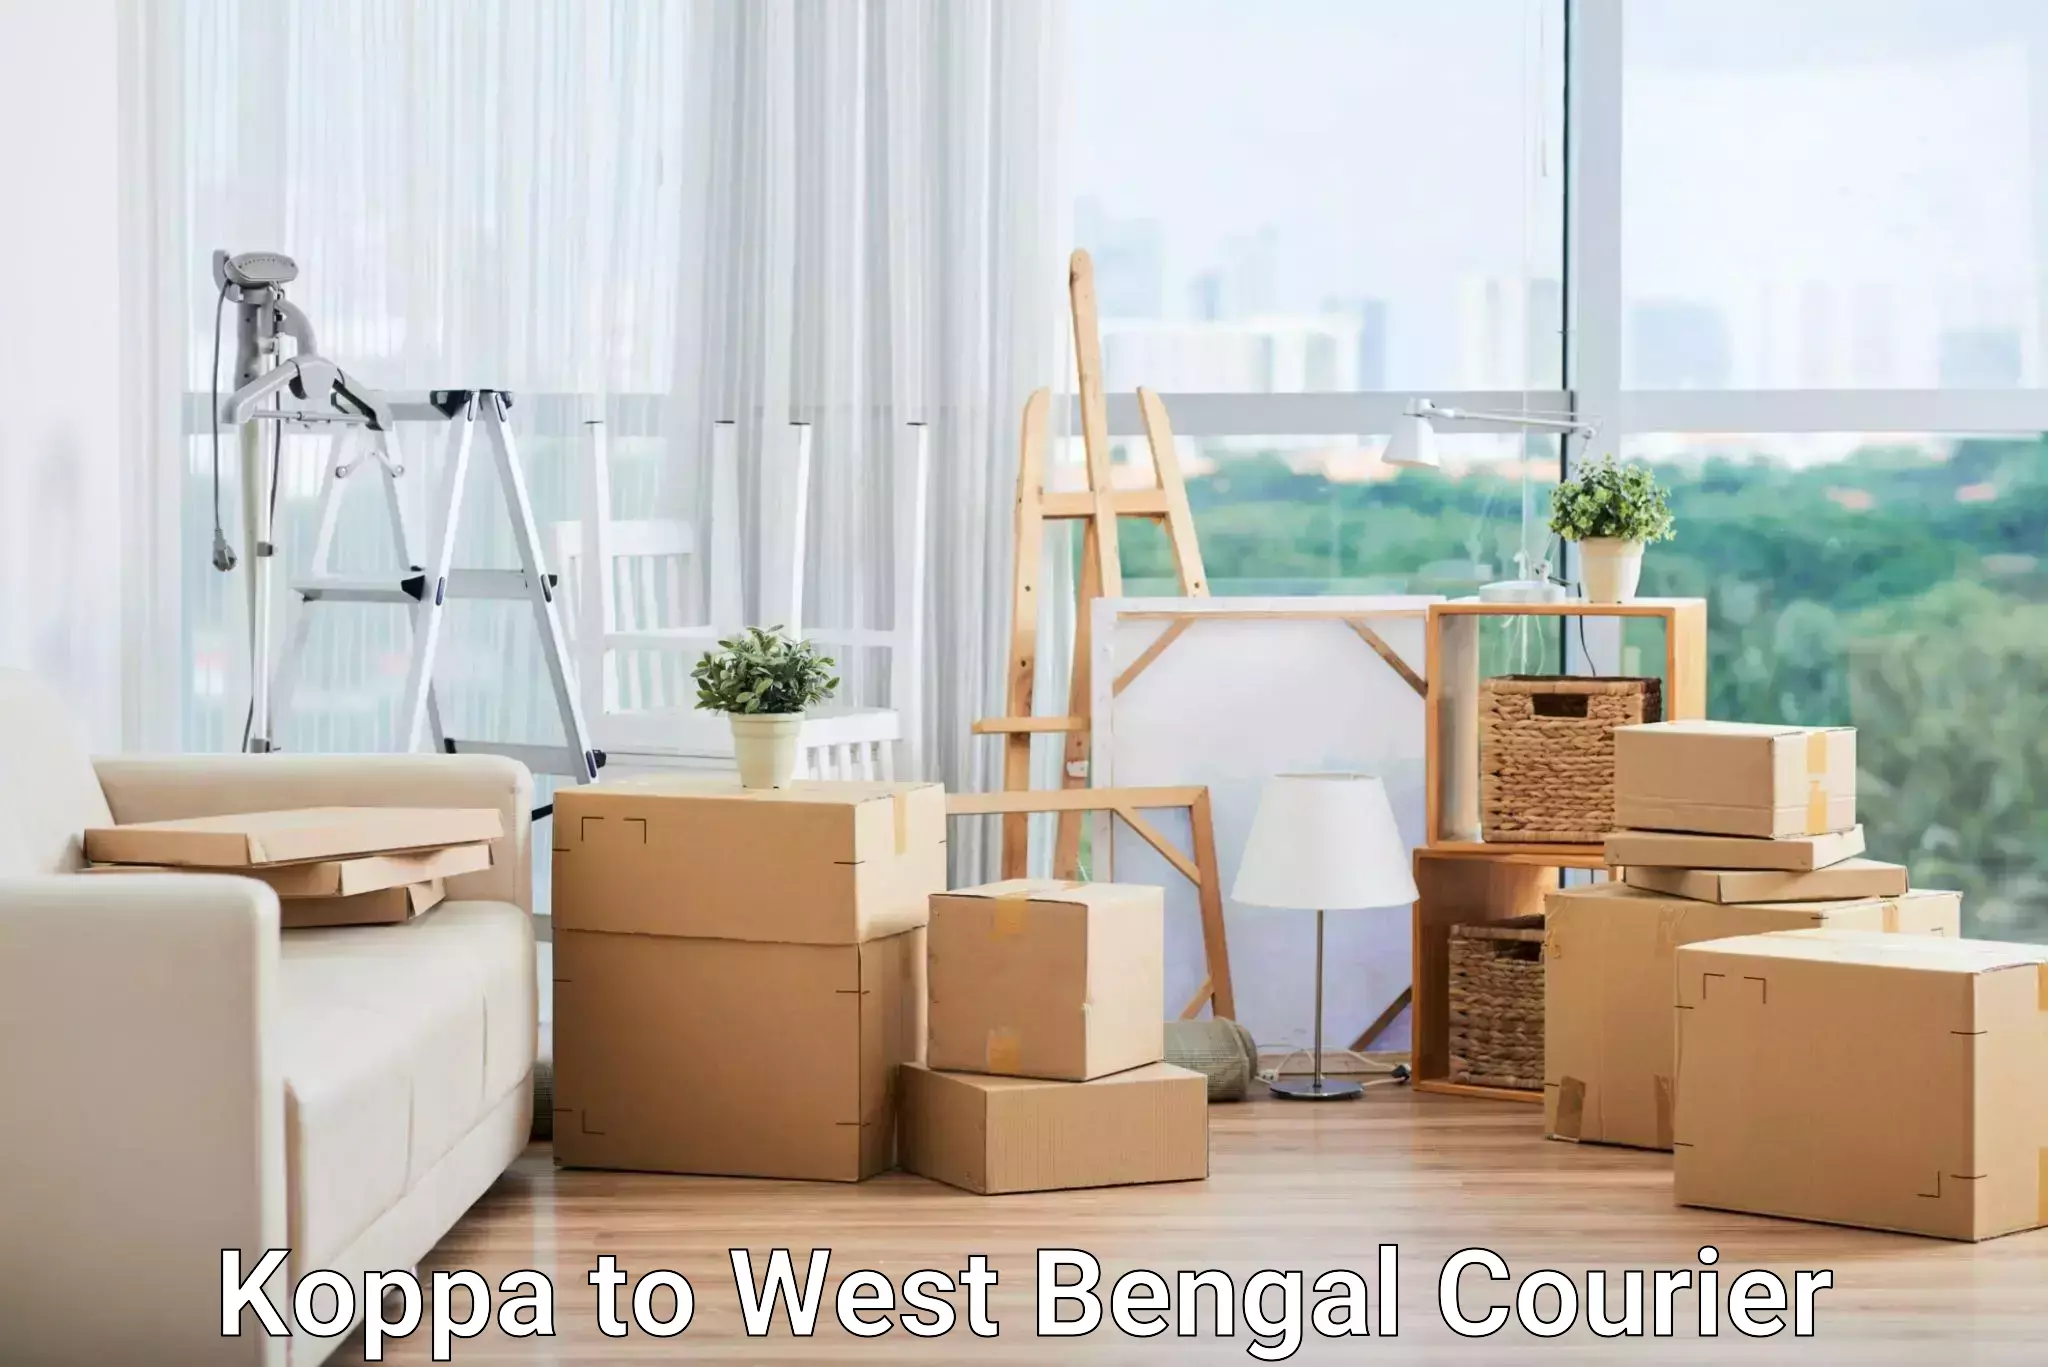 Efficient order fulfillment in Koppa to West Bengal